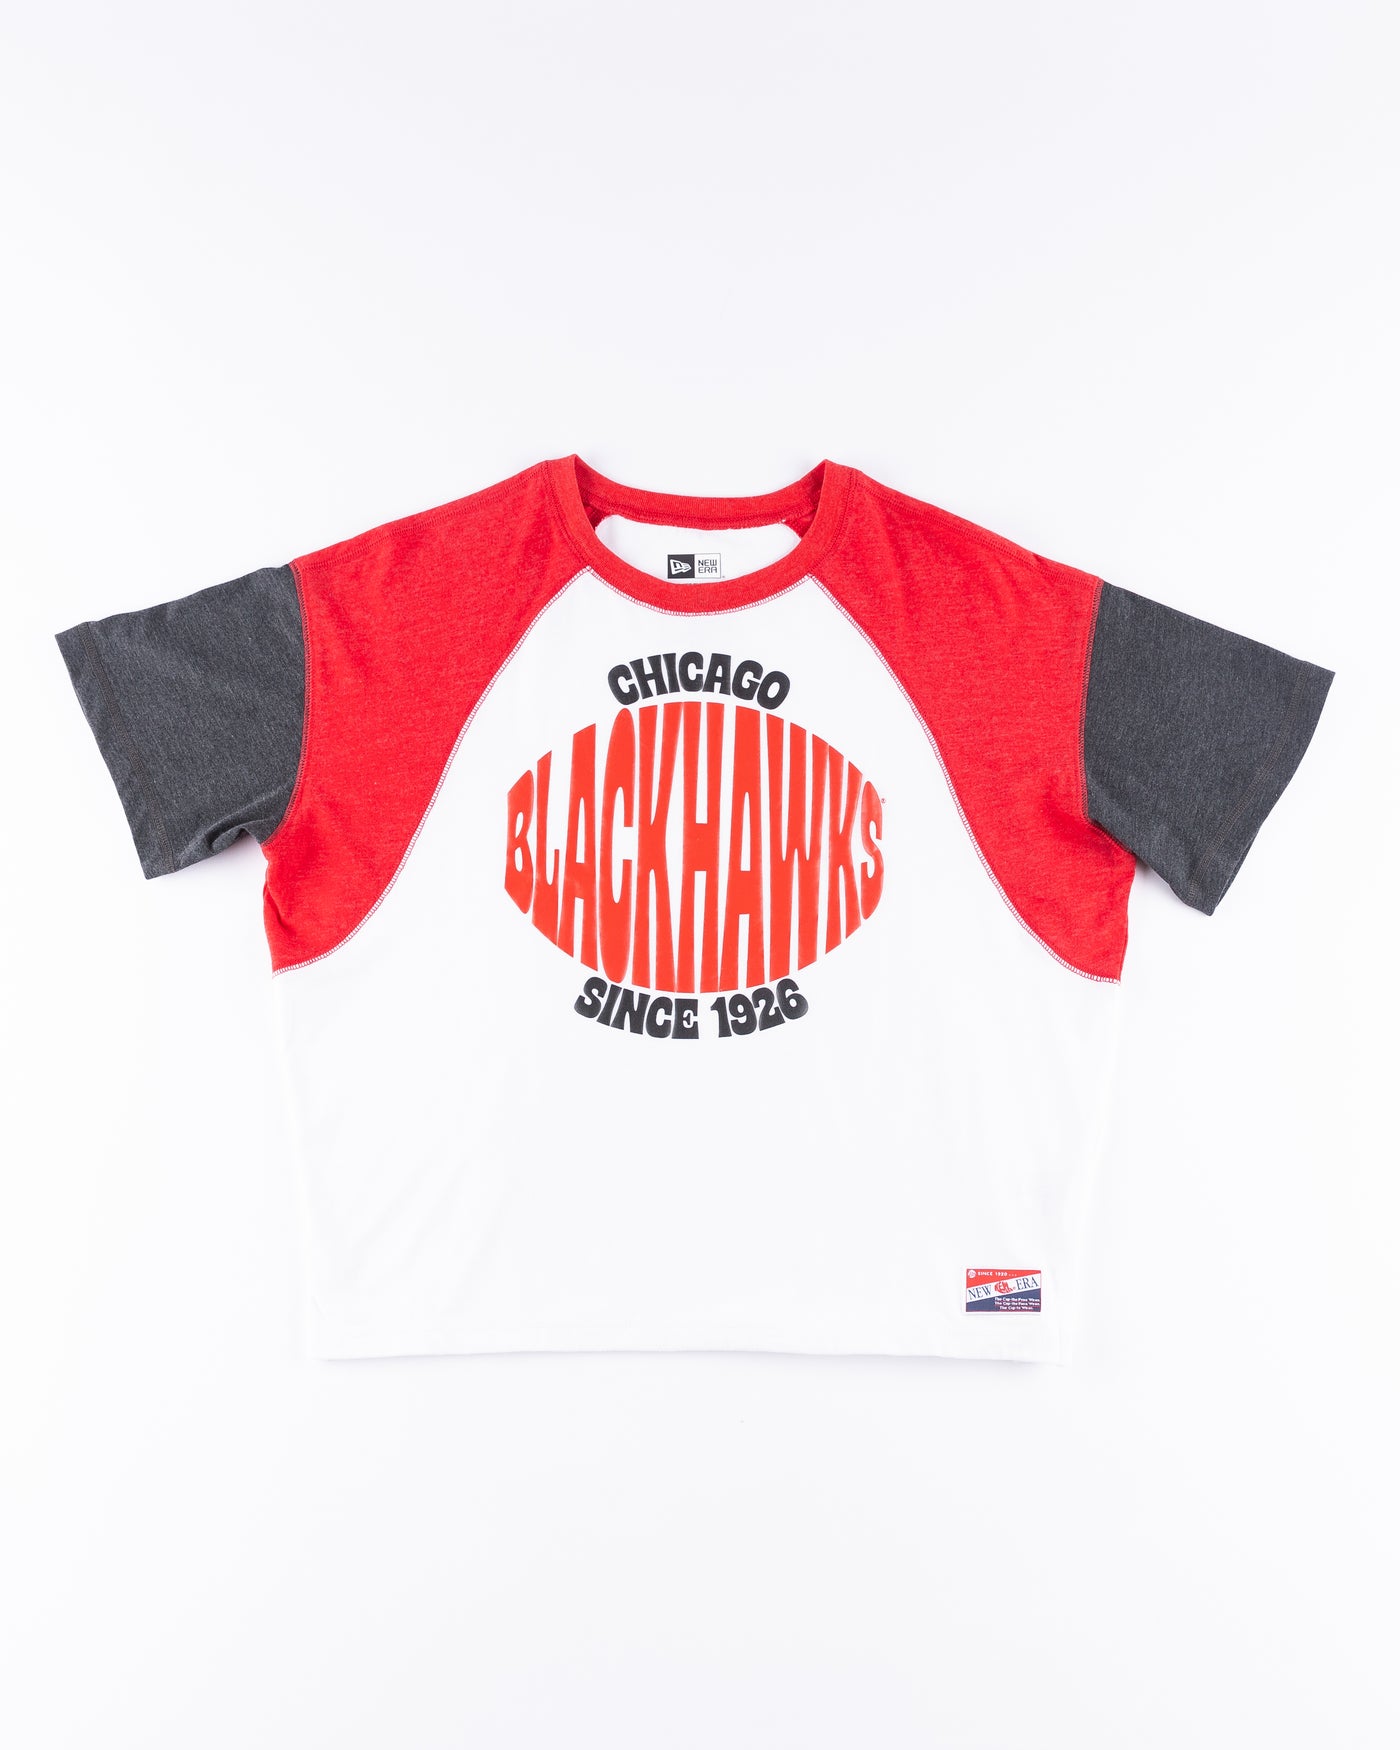 white red and grey New Era t-shirt with Chicago Blackhawks since 1926 wordmark graphic printed on front - front lay flat